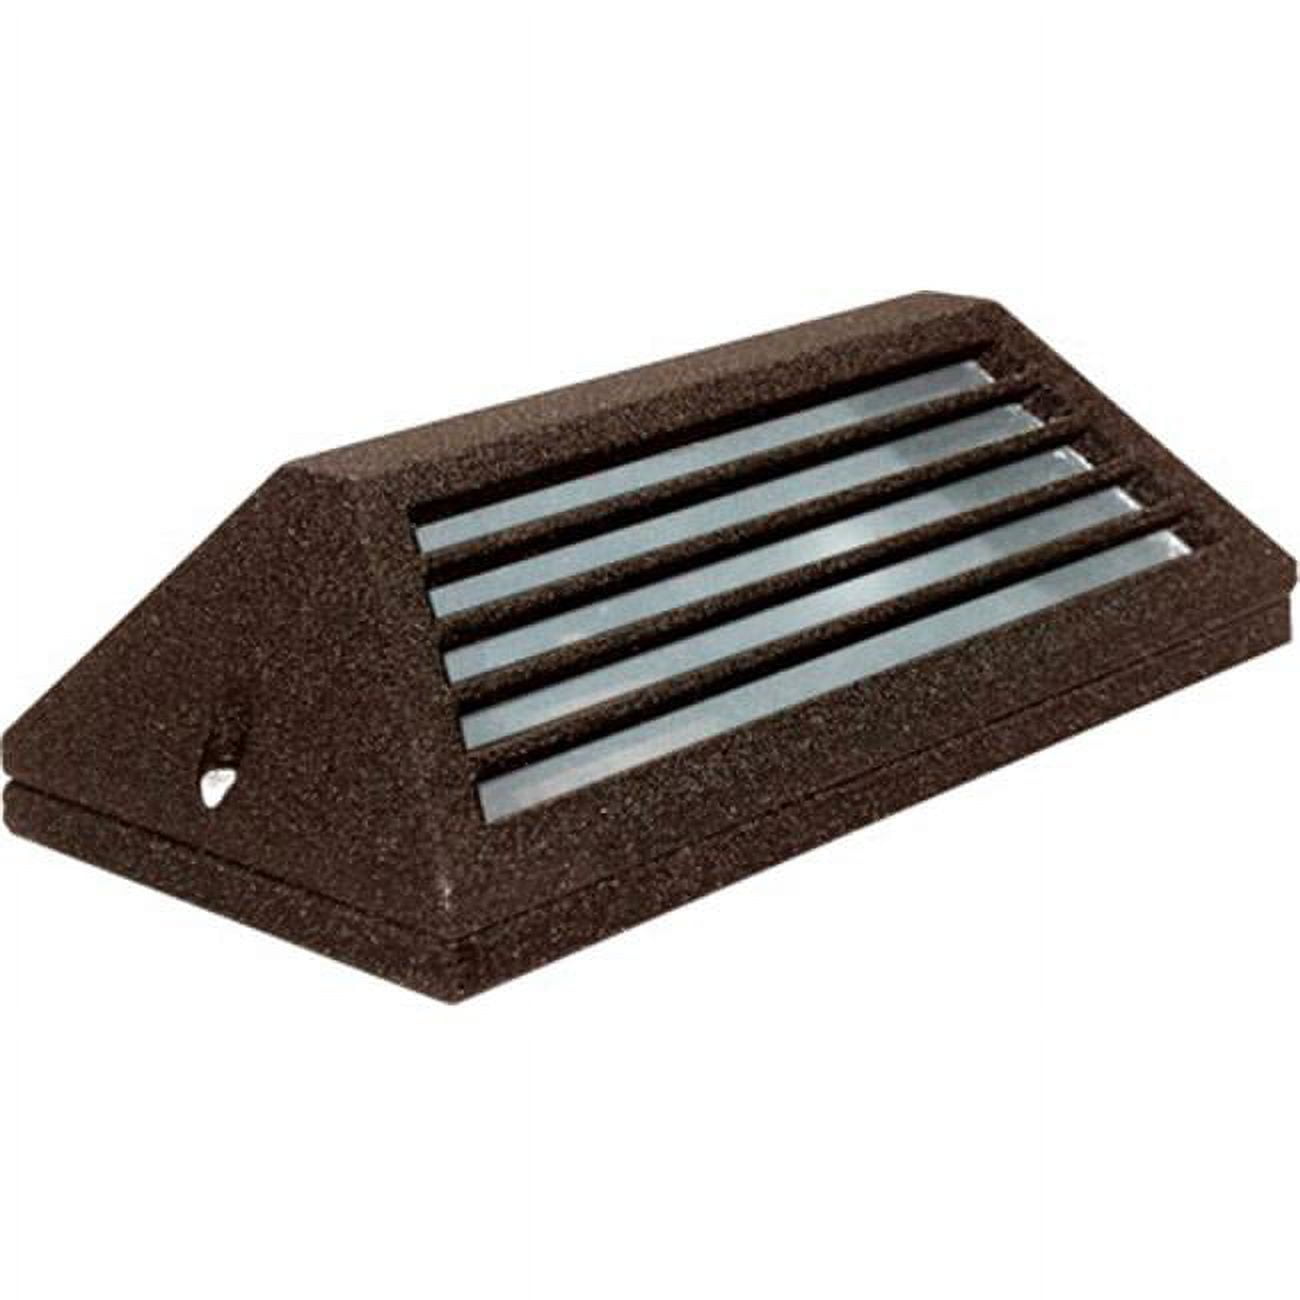 Picture of Dabmar Lighting LV608-BZ Cast Aluminum Surface Mount Louvered Brick, Step, Wall & Deck Light, Bronze - 4 x 7.25 x 2.25 in.